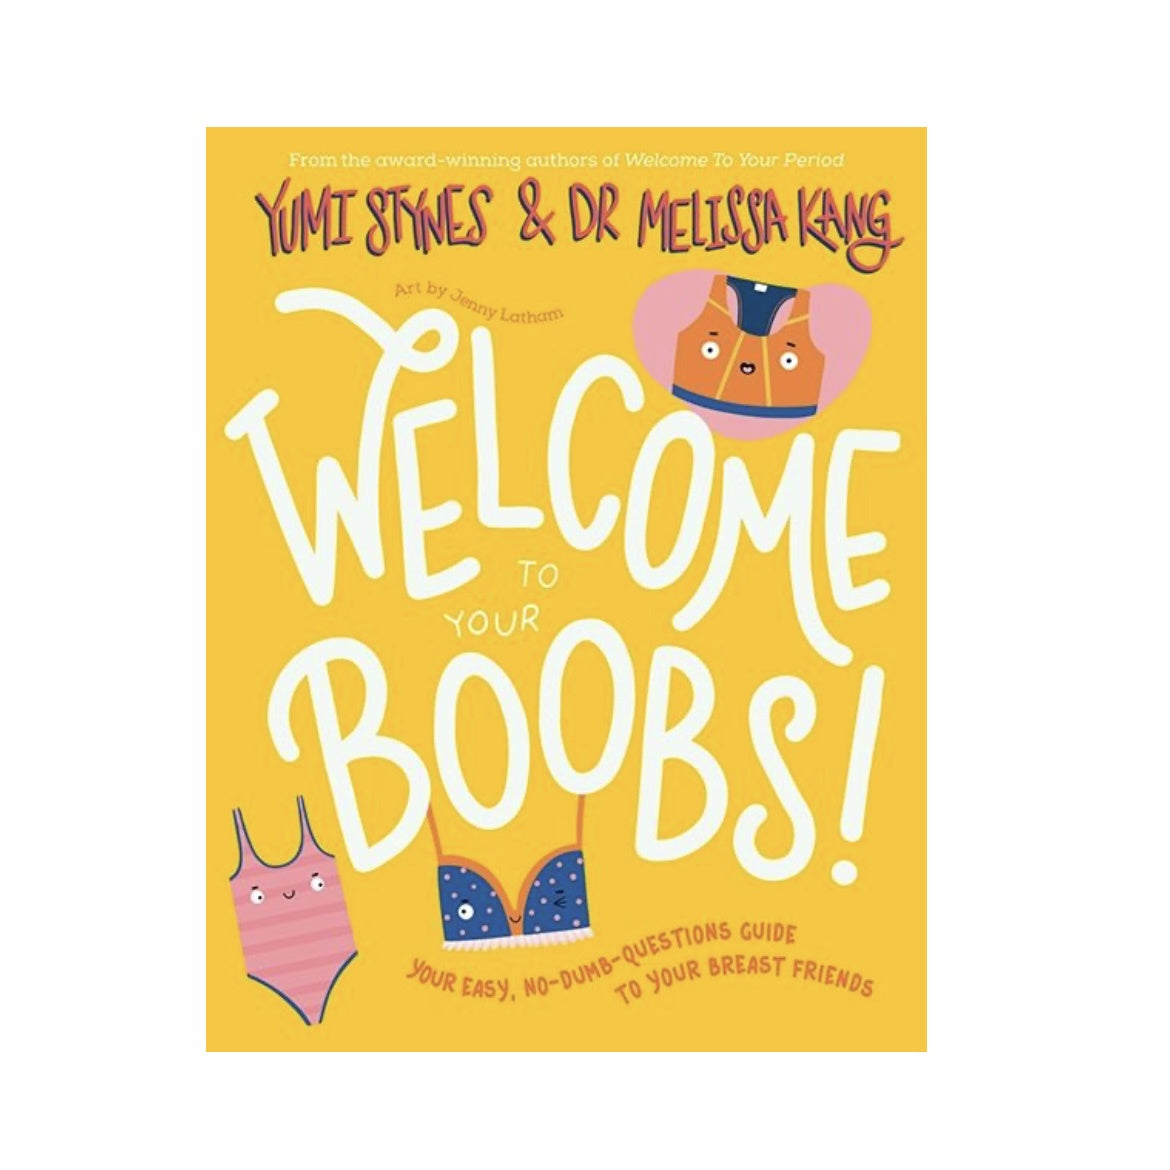 Welcome To Your Boobs